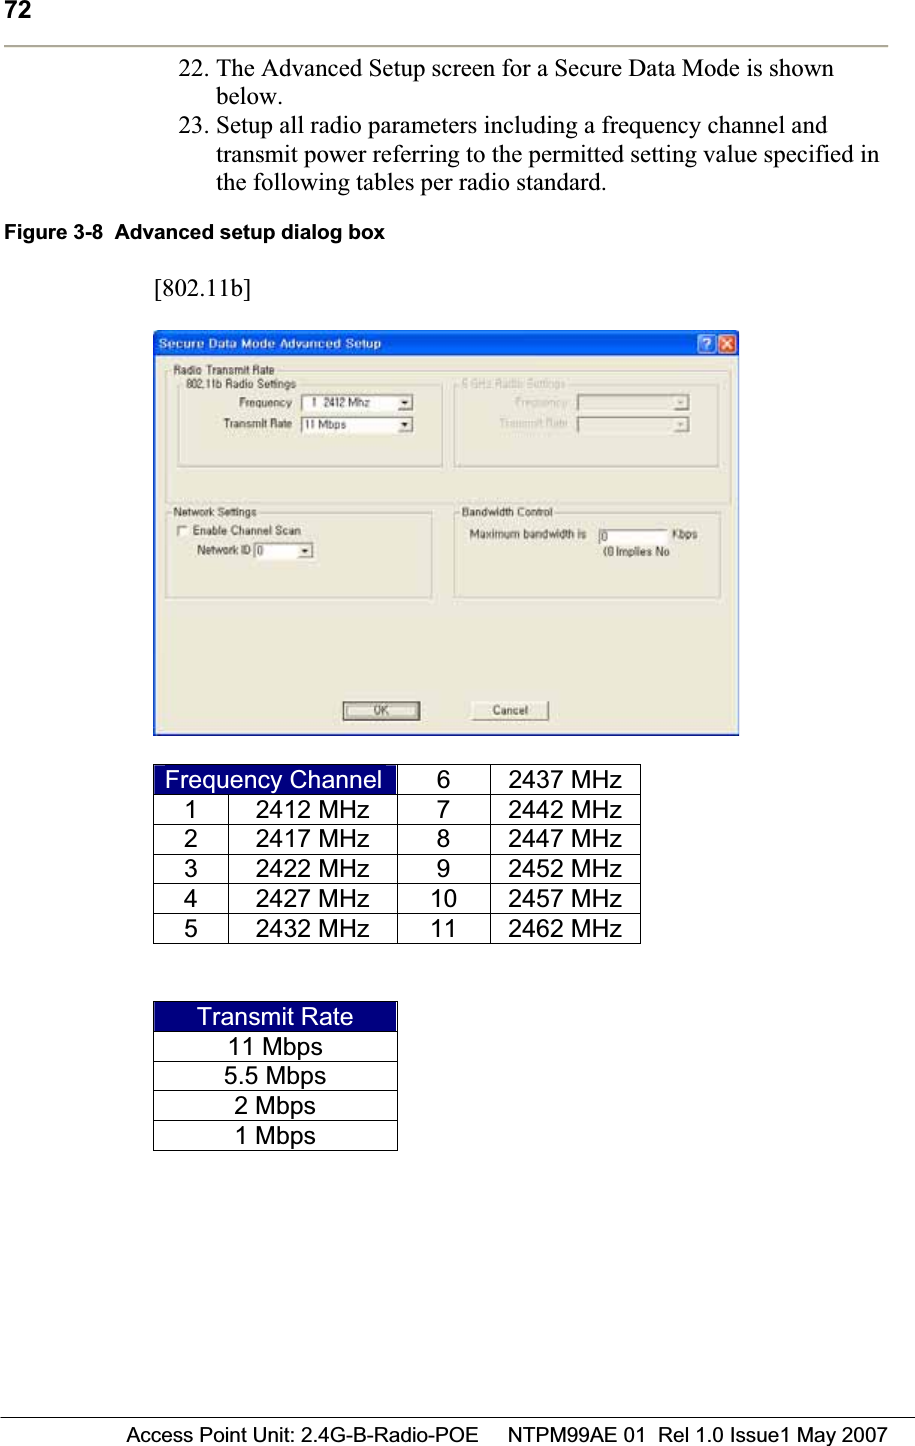 72 Access Point Unit: 2.4G-B-Radio-POE     NTPM99AE 01  Rel 1.0 Issue1 May 200722. The Advanced Setup screen for a Secure Data Mode is shown below.23. Setup all radio parameters including a frequency channel and transmit power referring to the permitted setting value specified in the following tables per radio standard.Figure 3-8  Advanced setup dialog box [802.11b]Frequency Channel 6 2437 MHz1 2412 MHz  7 2442 MHz2 2417 MHz  8 2447 MHz3 2422 MHz  9 2452 MHz4  2427 MHz  10  2457 MHz5  2432 MHz  11  2462 MHzTransmit Rate 11 Mbps 5.5 Mbps 2 Mbps 1 Mbps 